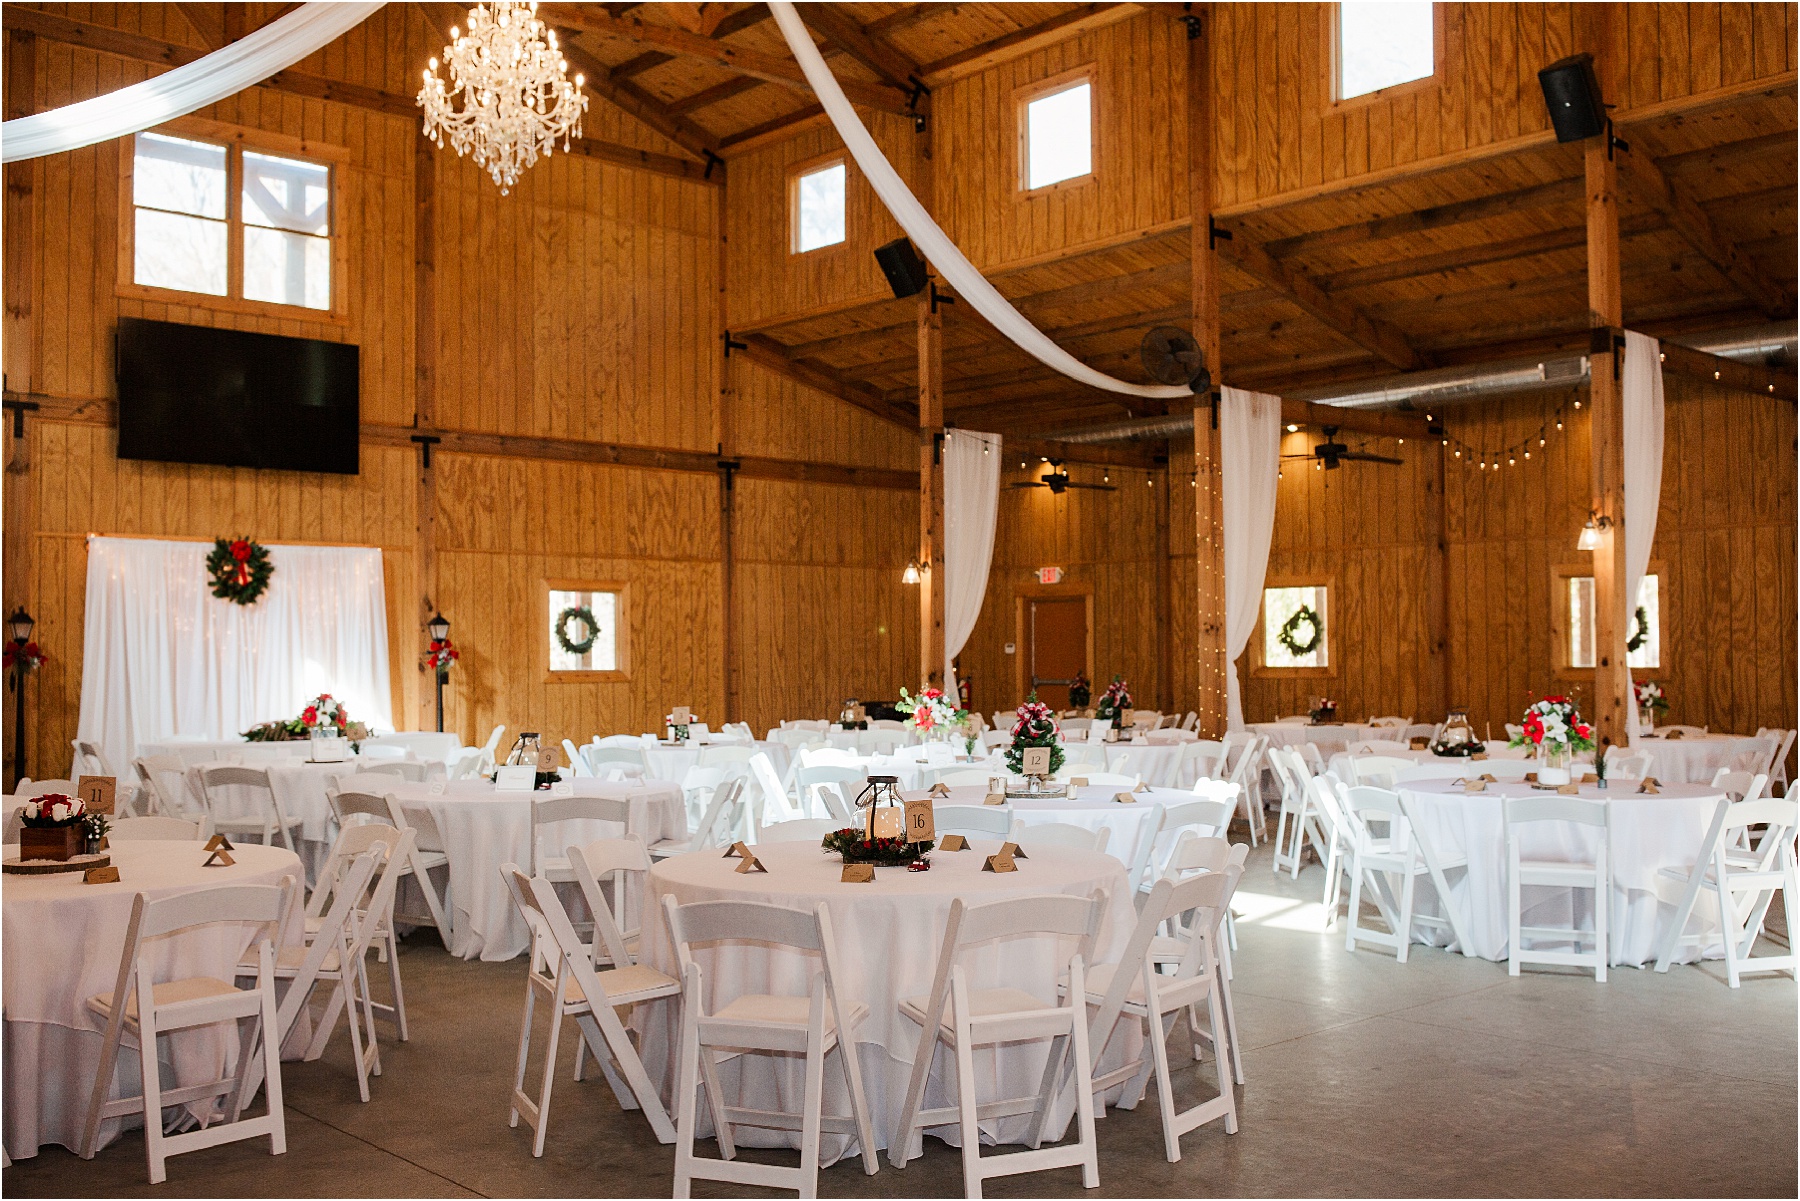 Enchanted acres inside of barn venue with white tables and chairs